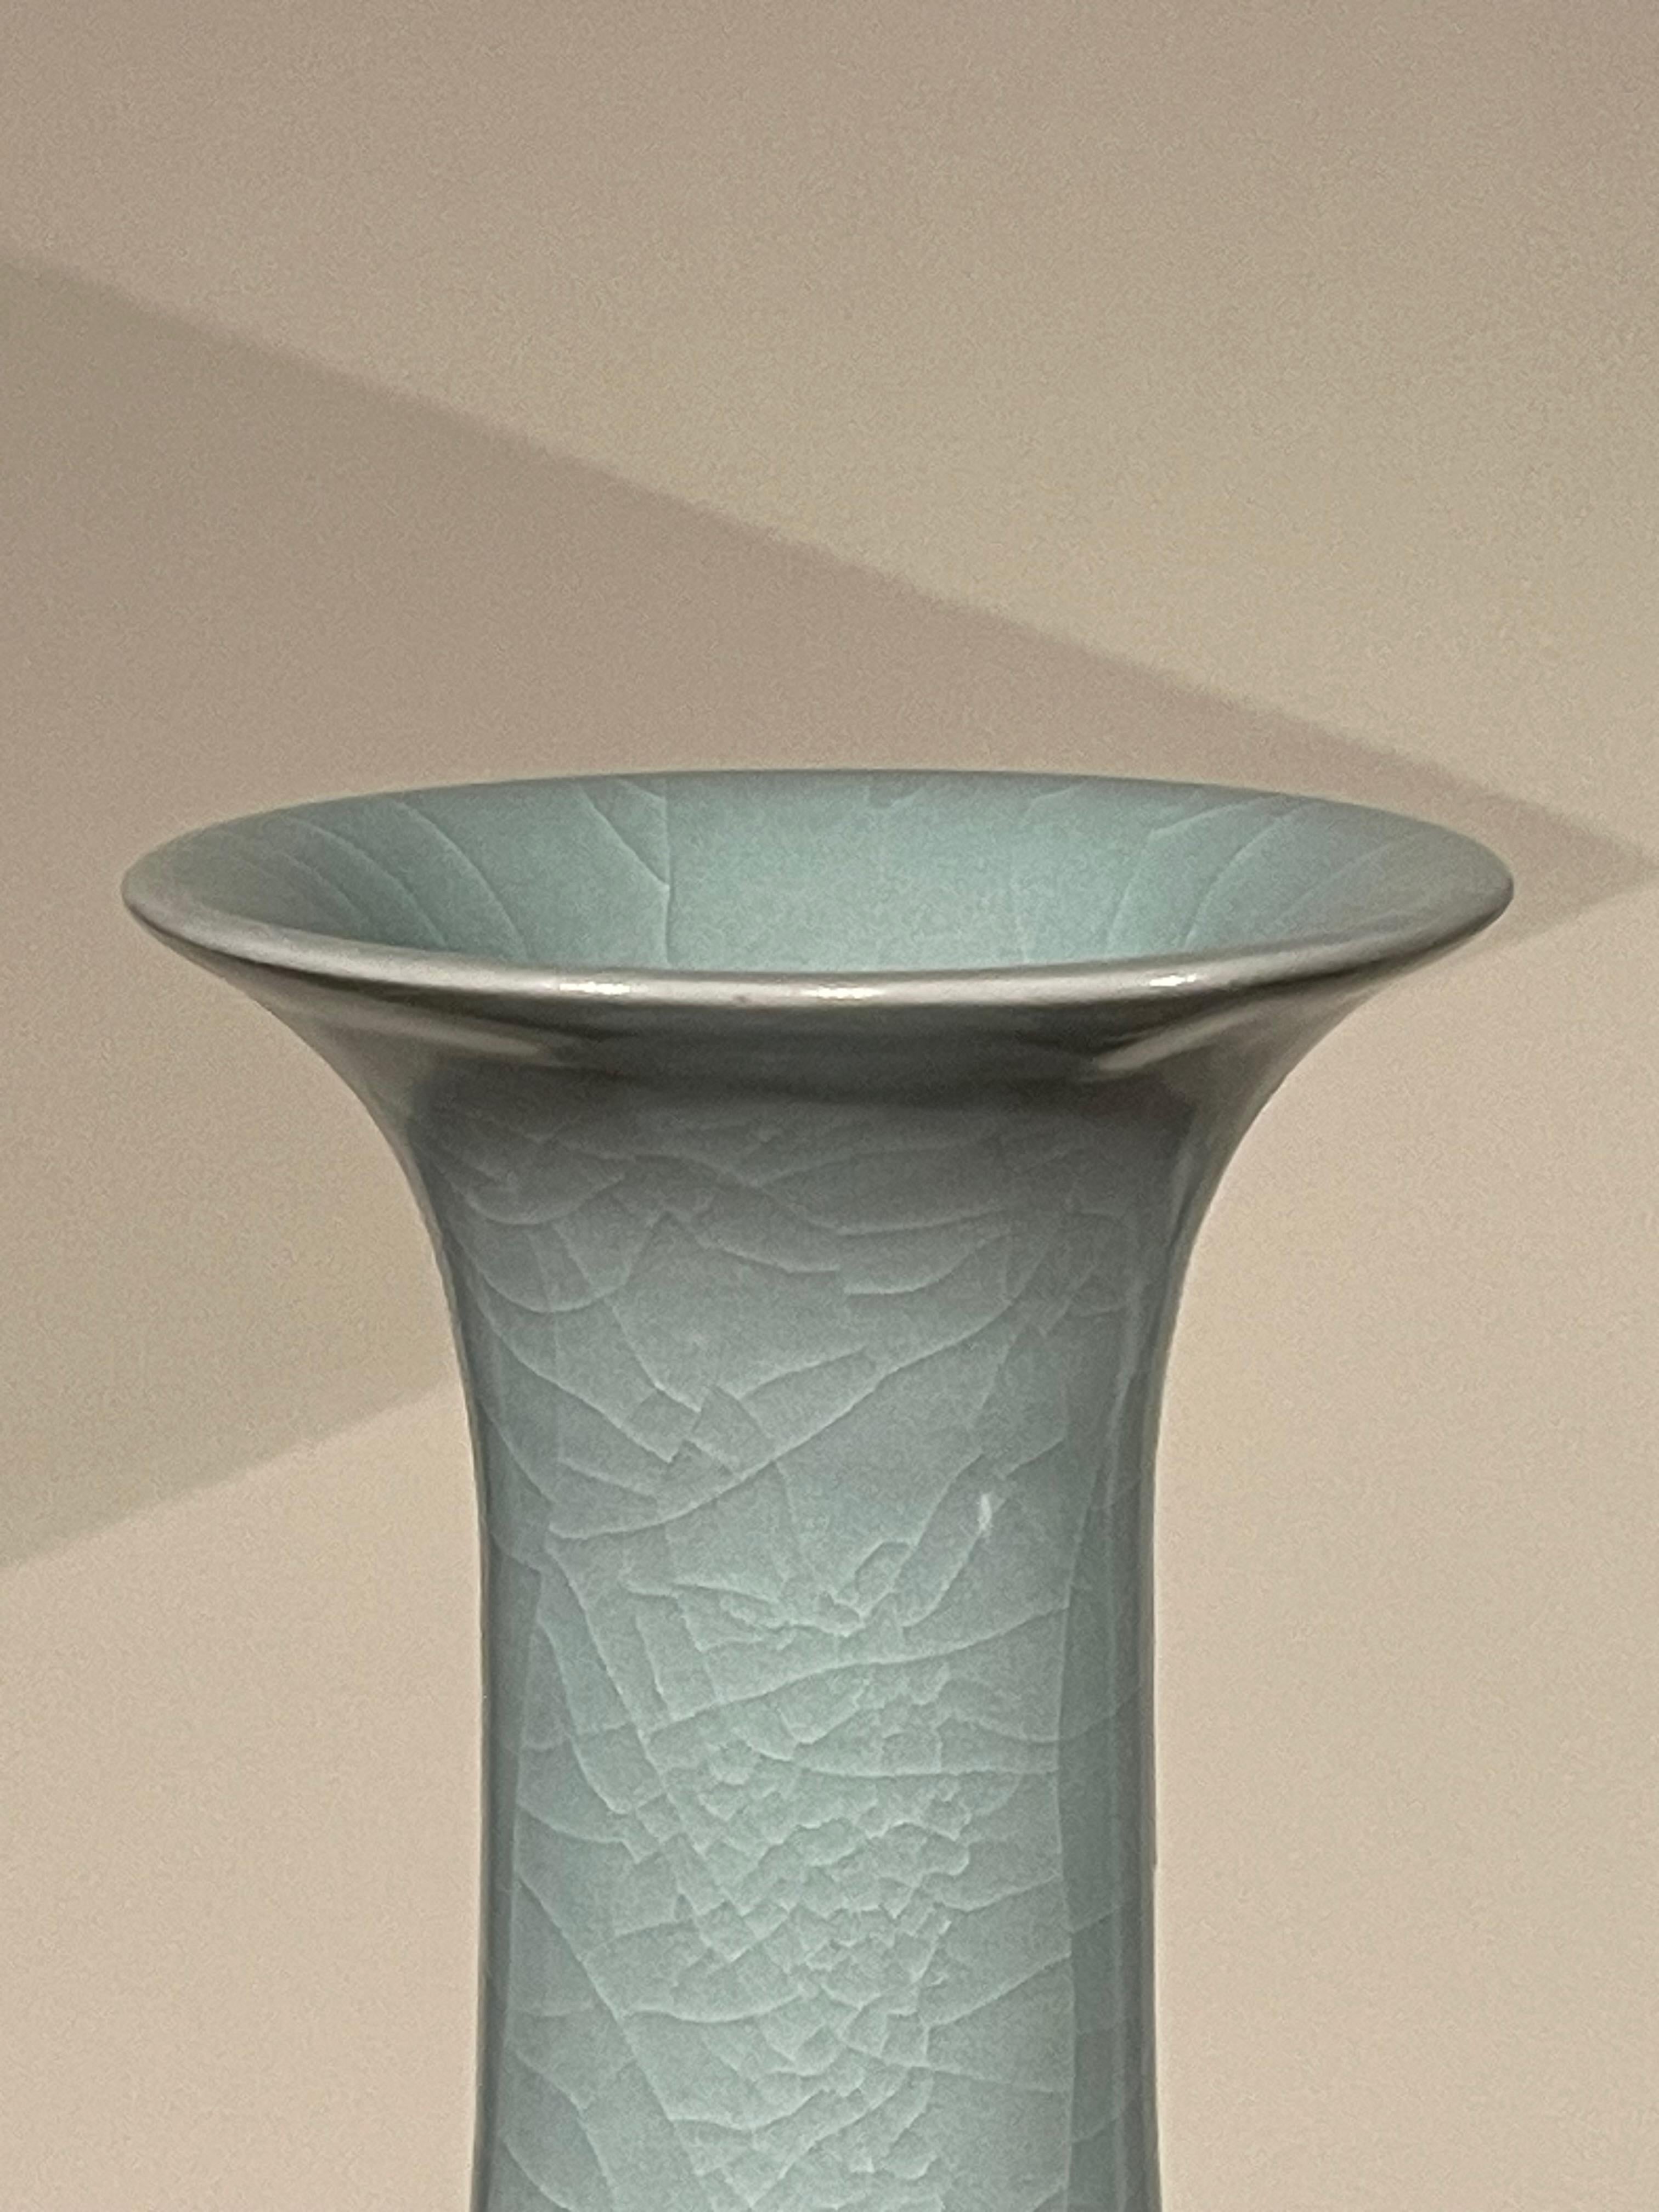 Contemporary Chinese pale turquoise vase.
Tulip shape with rounded bottom.
Large collection available with varying sizes and shapes.
Sold individually.
